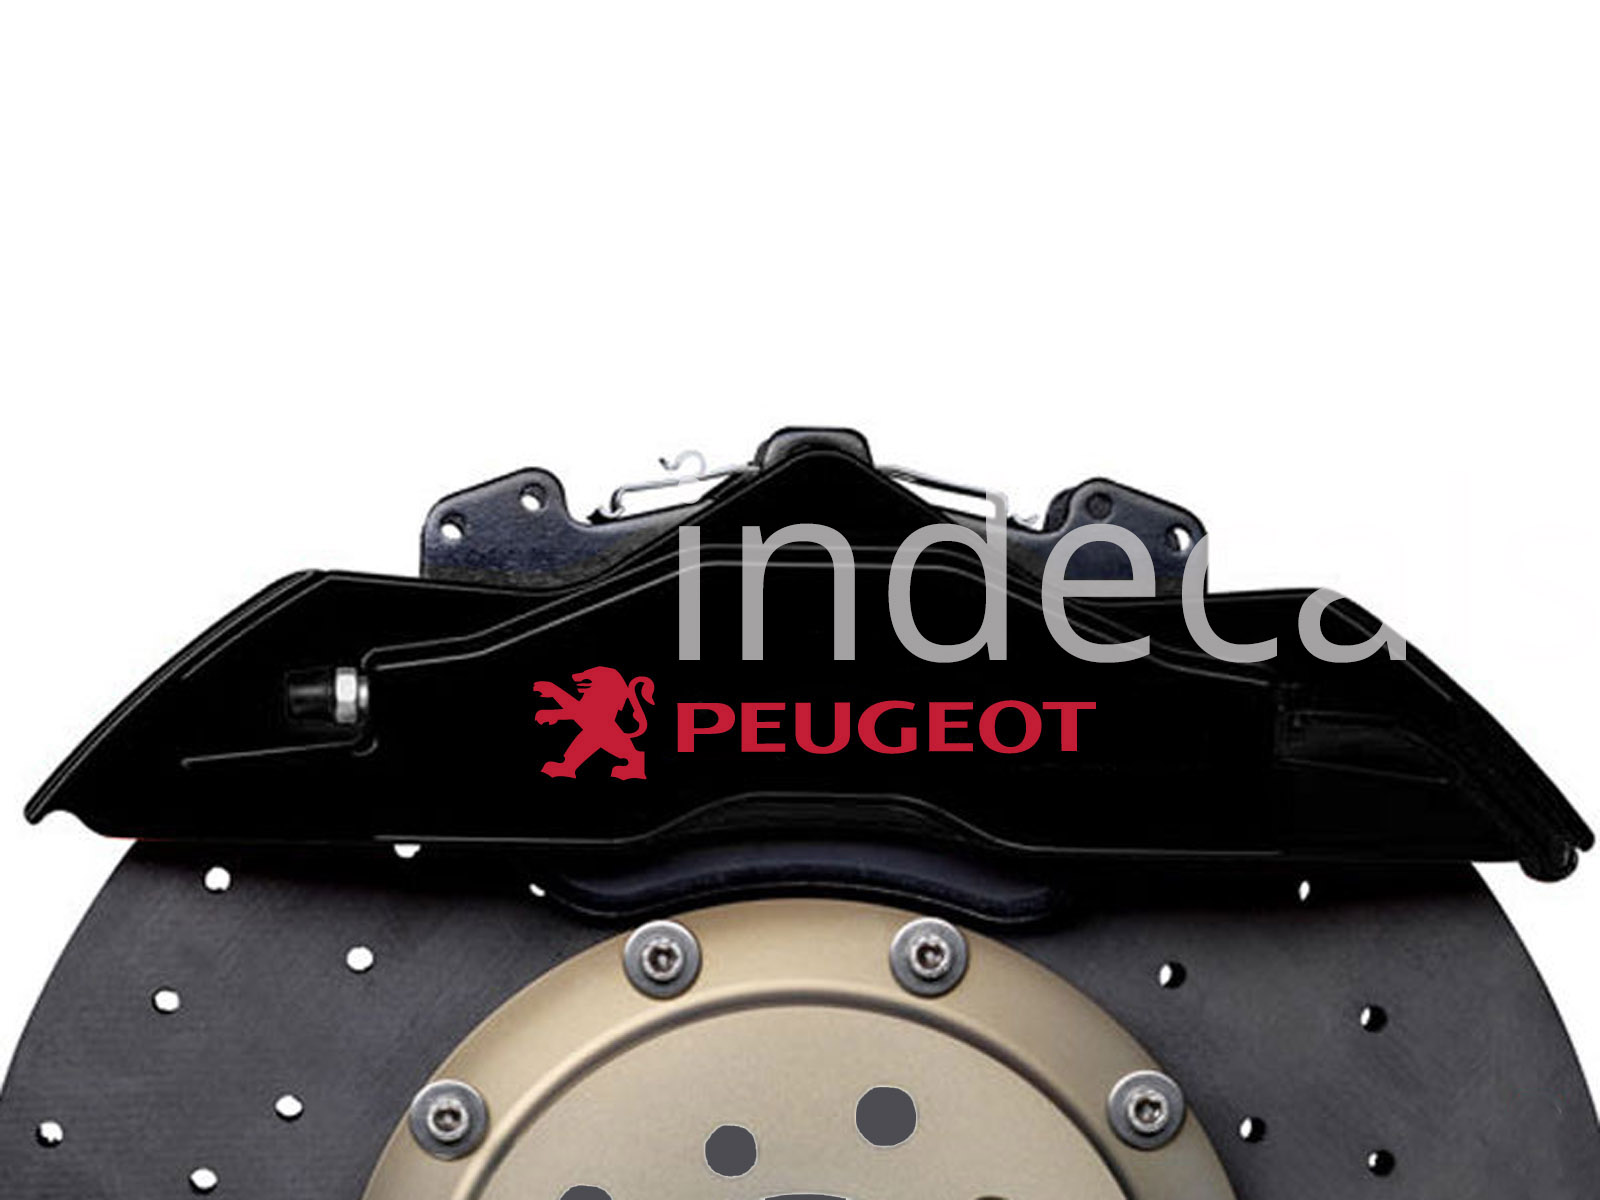 6 x Peugeot Stickers for Brakes - Red